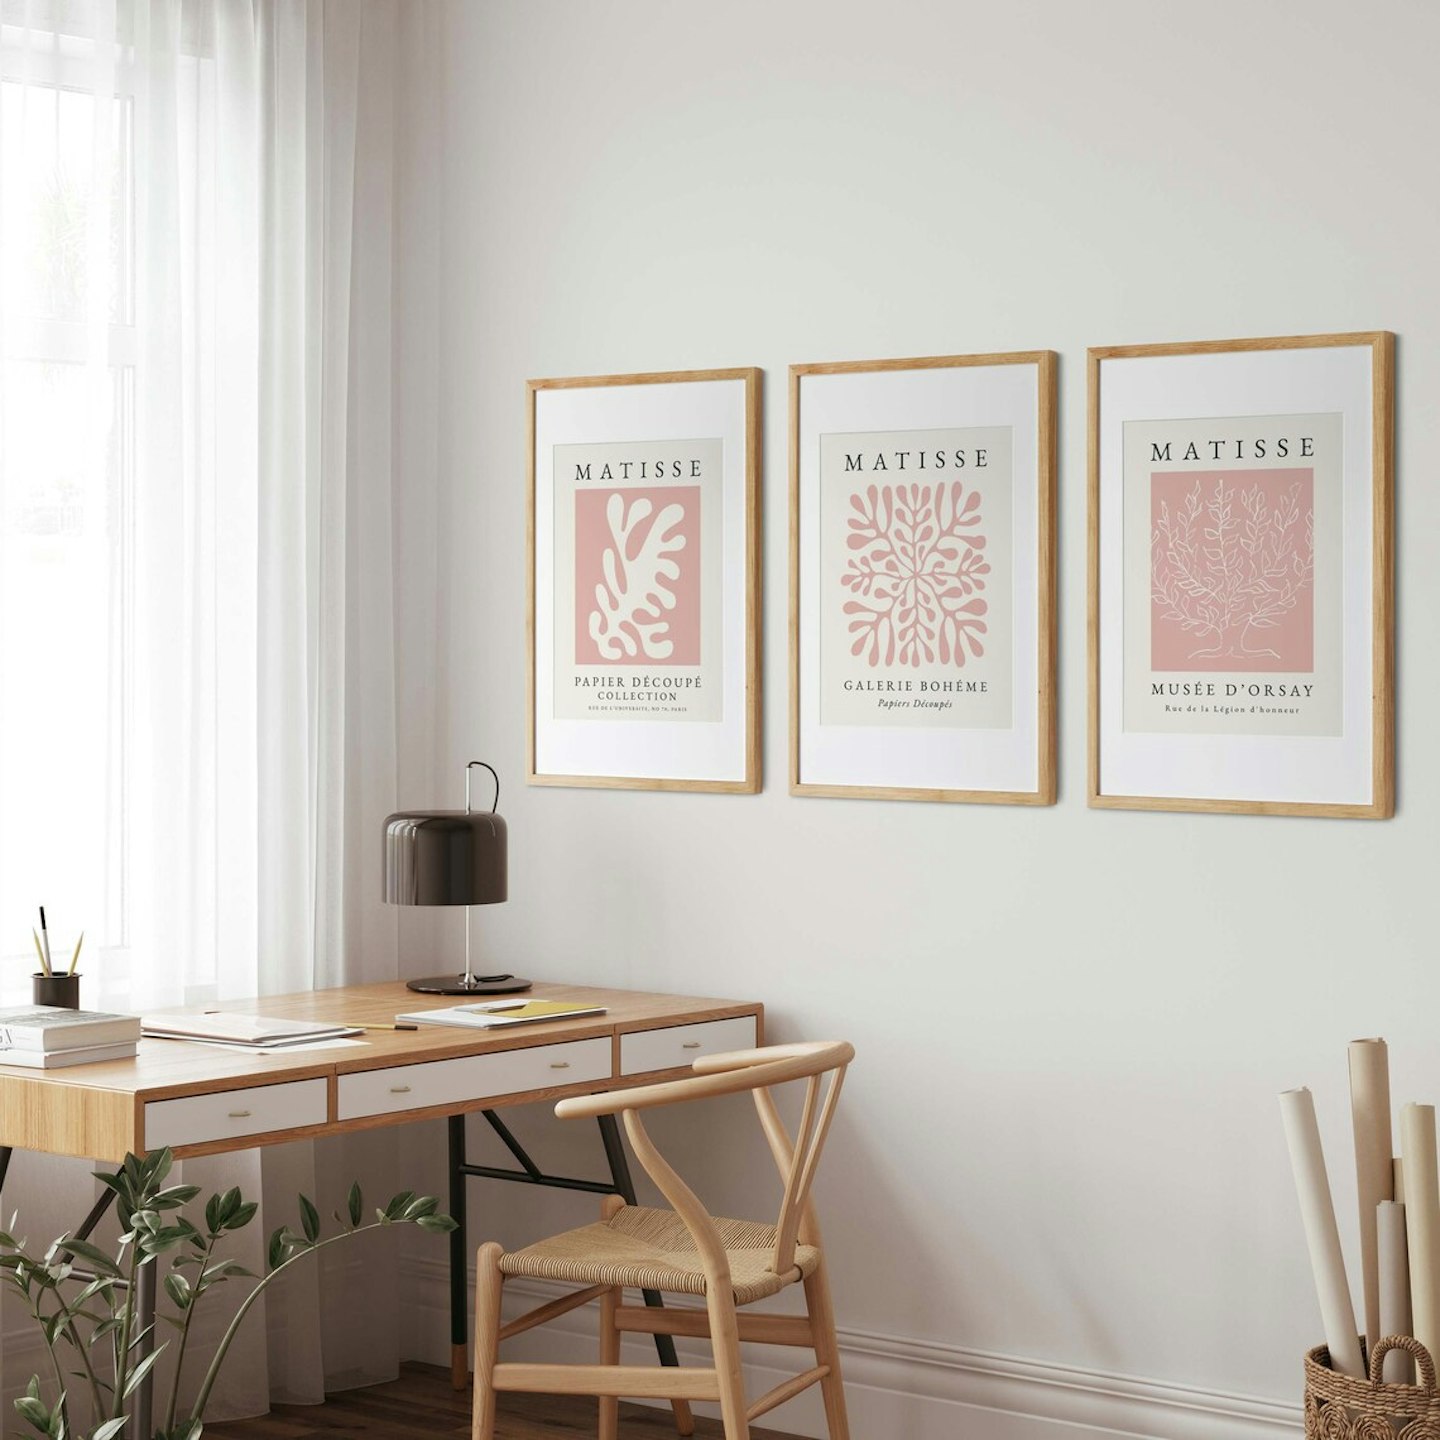 Etsy, Set of Matisse Prints, From £11